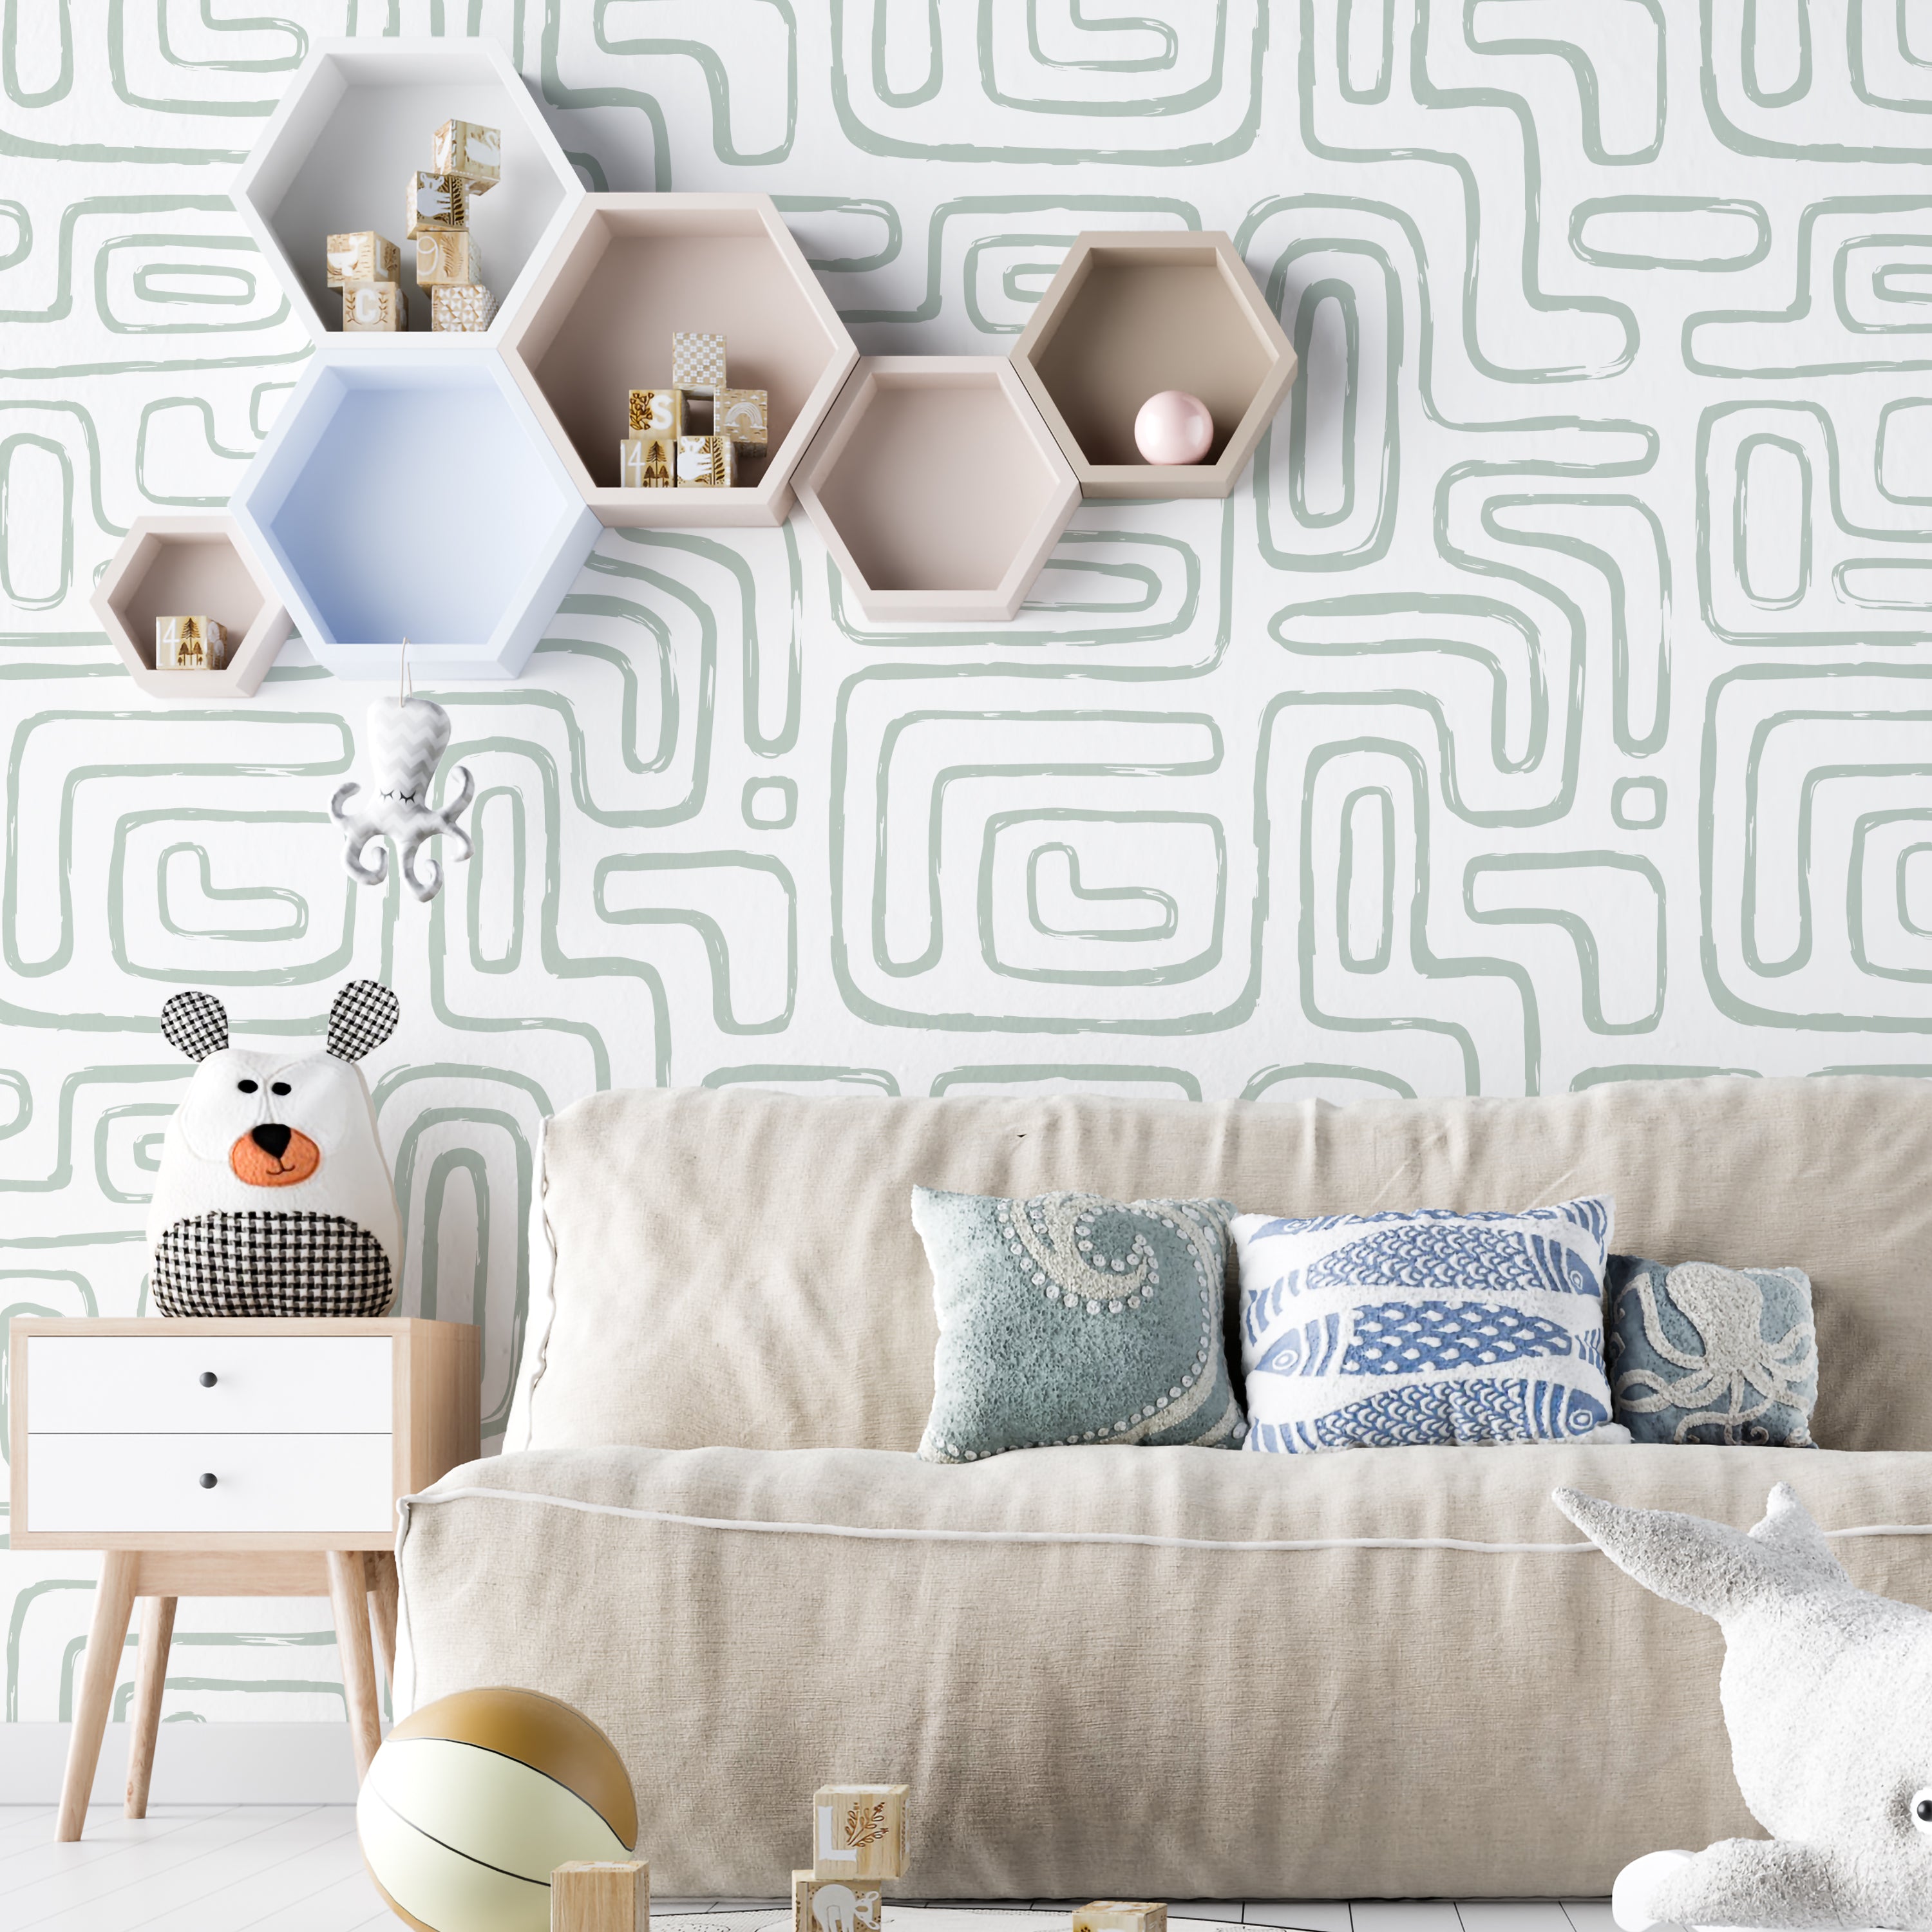 A stylish living room setting showcasing the Organic Wallpaper 4 on the walls, enhancing the space with its distinct seafoam green abstract shapes. The room includes a beige sofa adorned with various pillows, a whimsical stuffed animal on a small wooden table, and hexagonal wall shelves in soft pastels